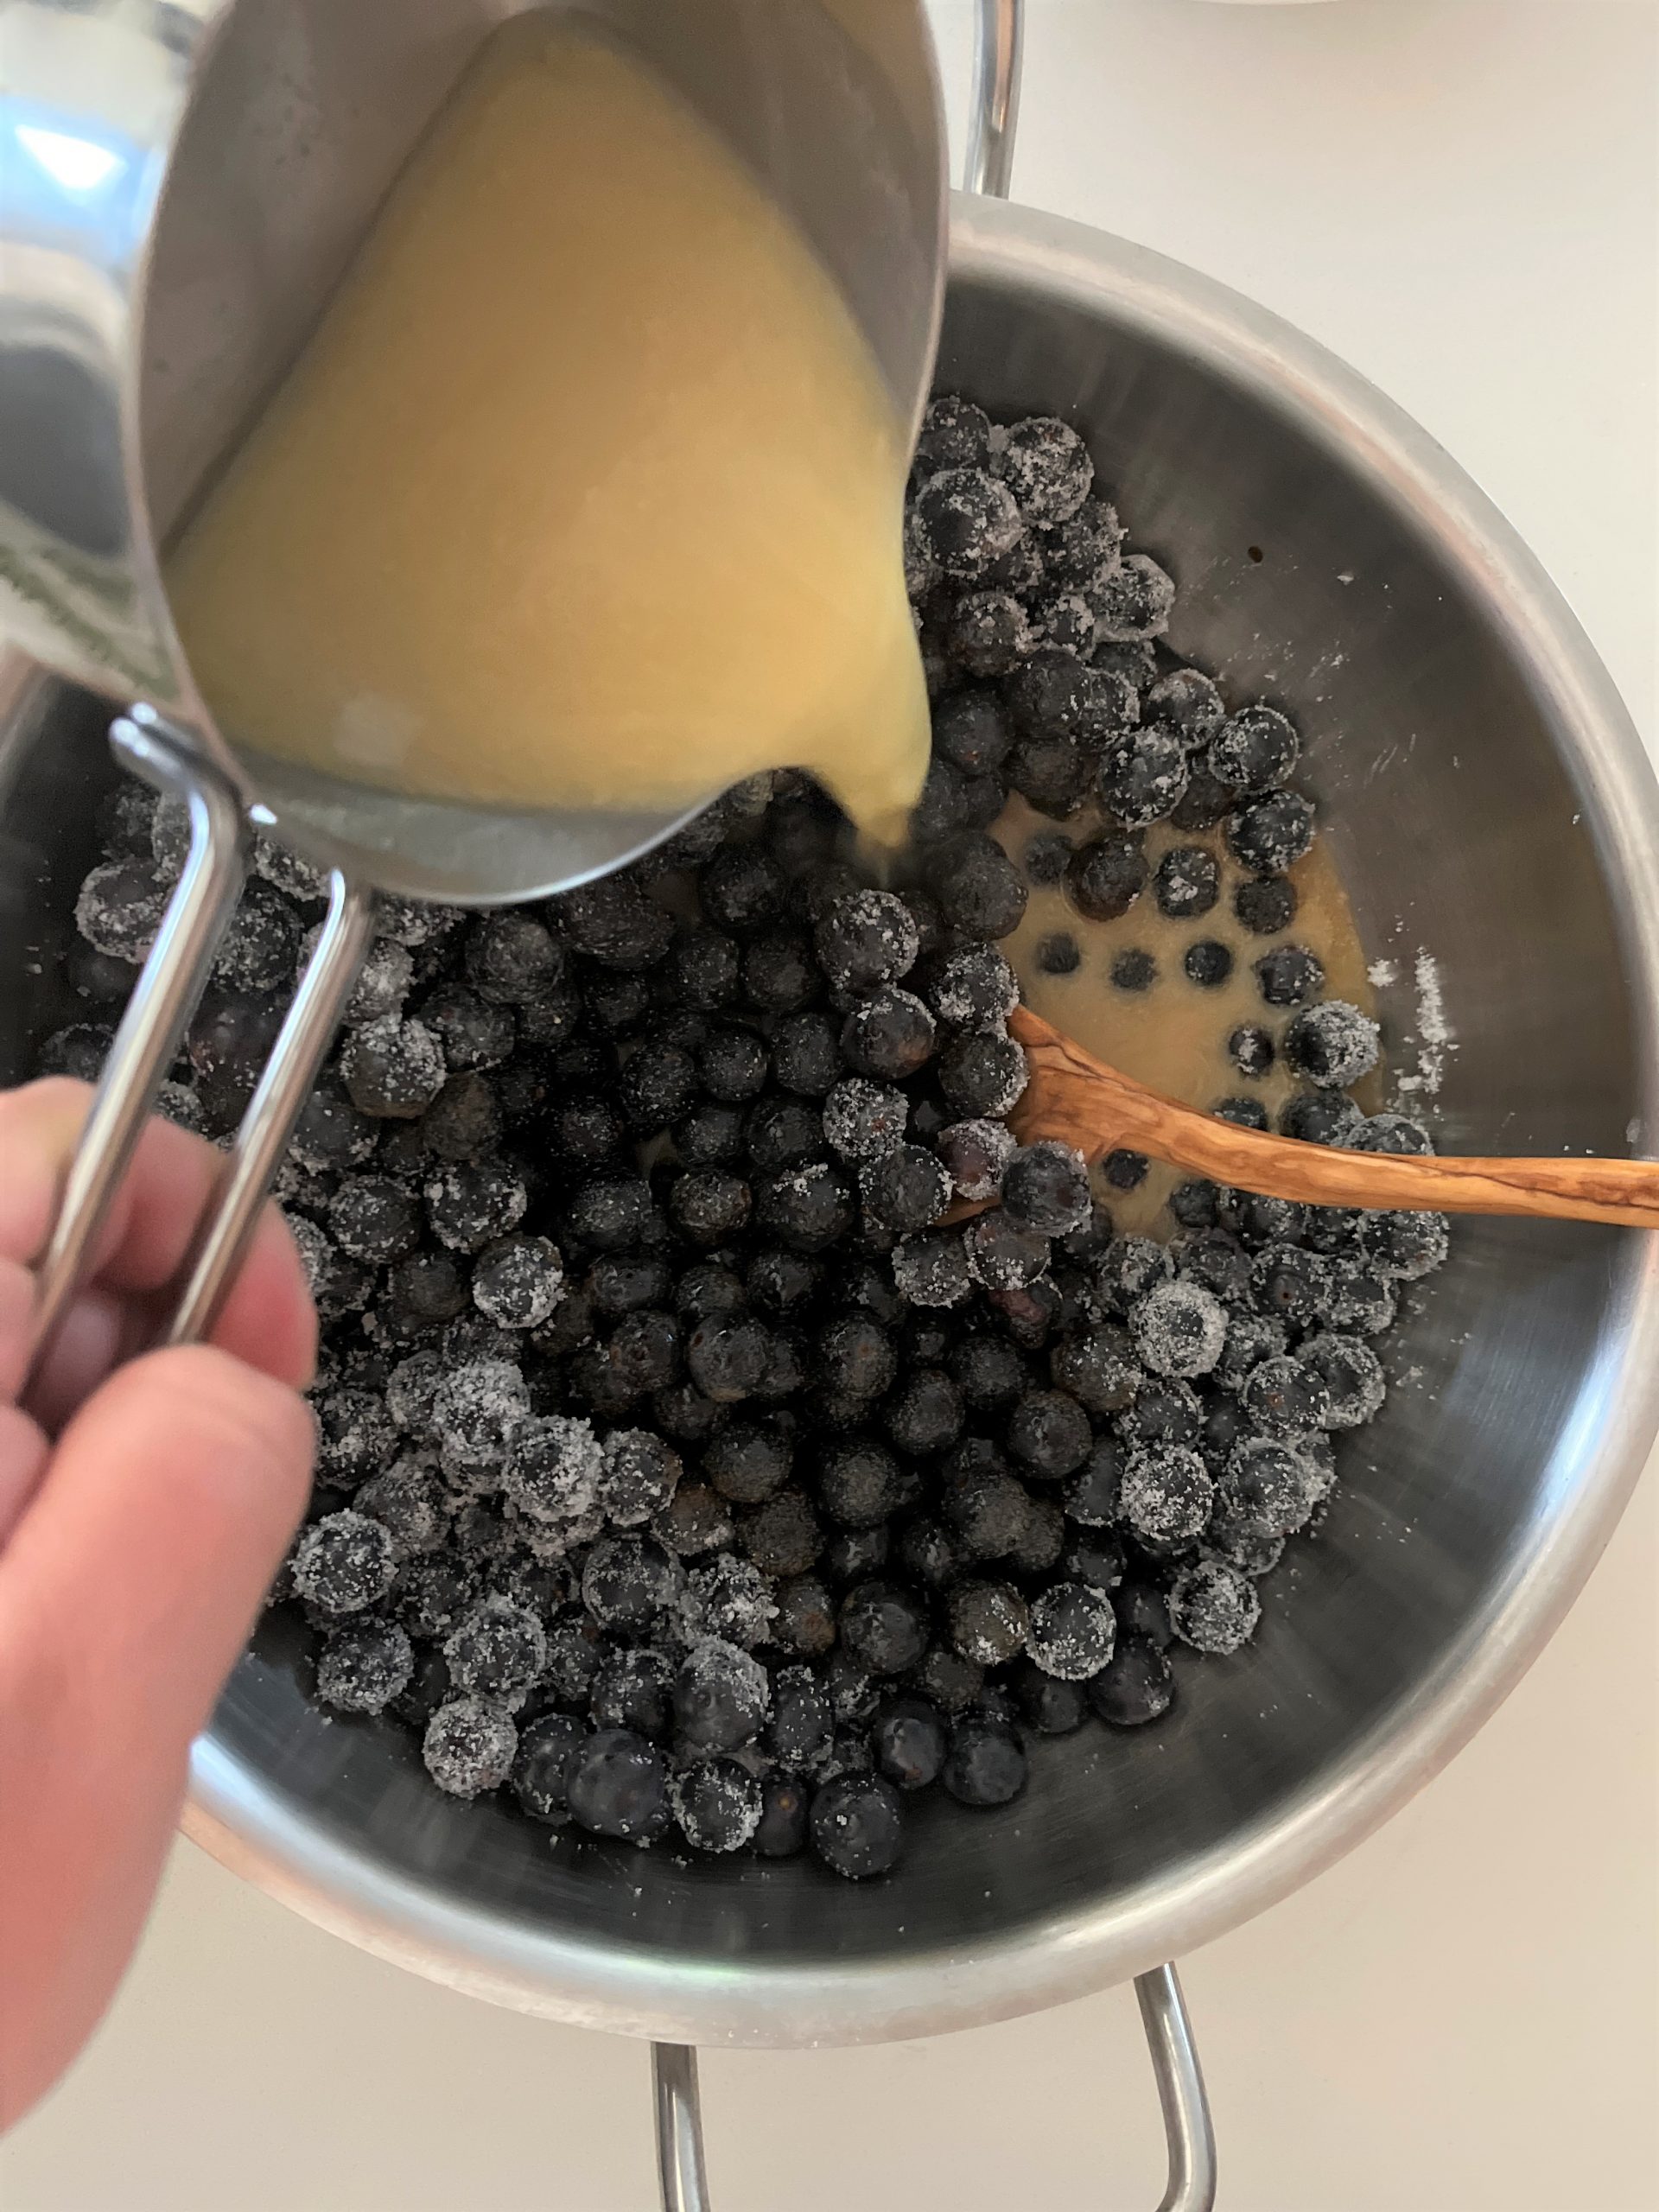 Concord Grapes Jam Recipe: Add sugar and the mustard-wine mix to the pot with grapes